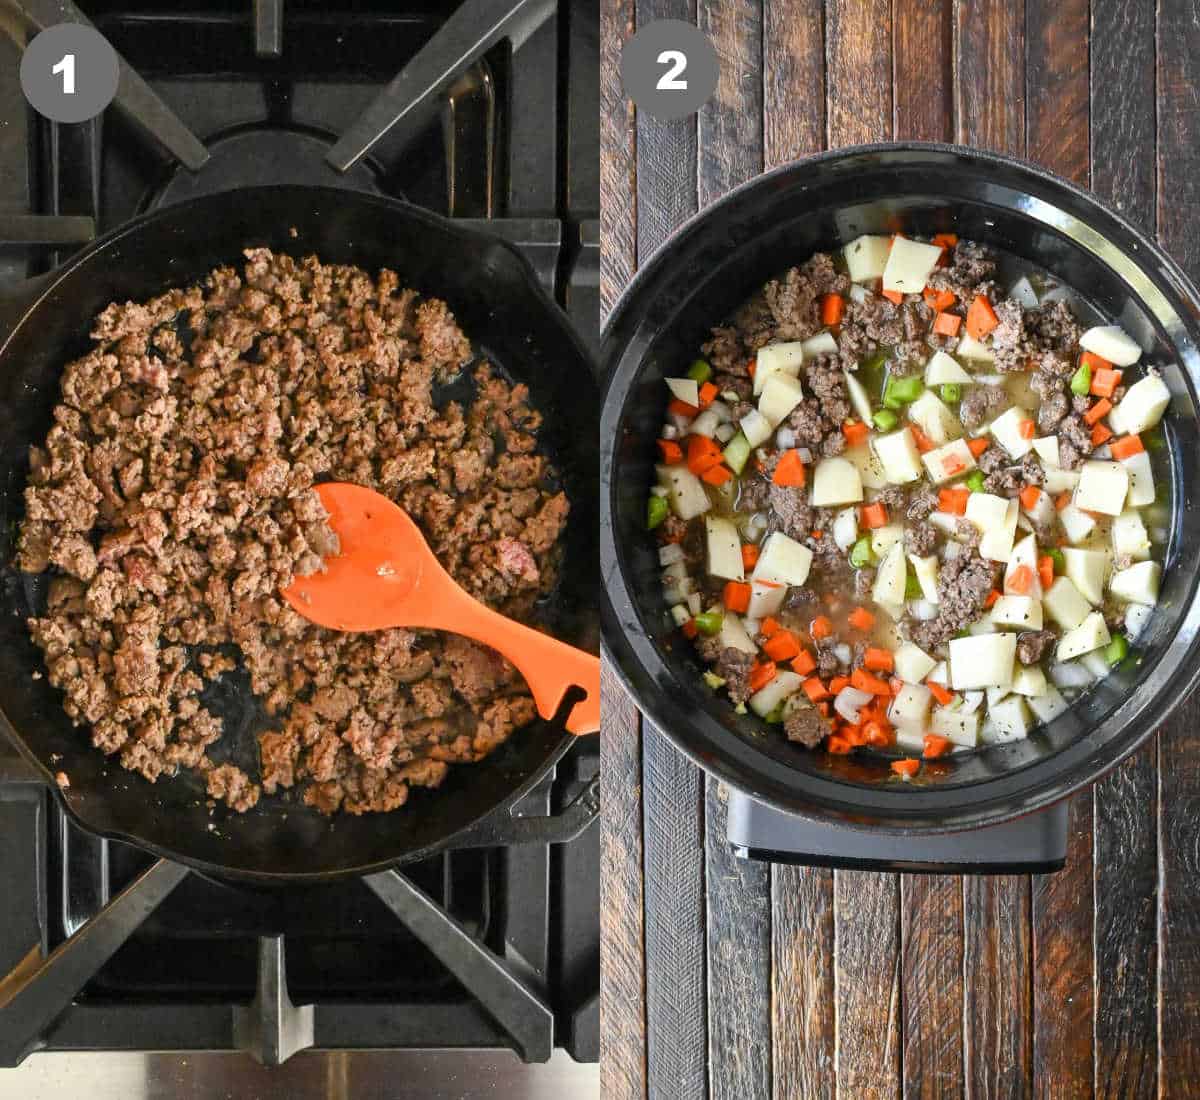 Ground beef cooked in a skillet then added to the slow cooker with the rest of the vegetables.